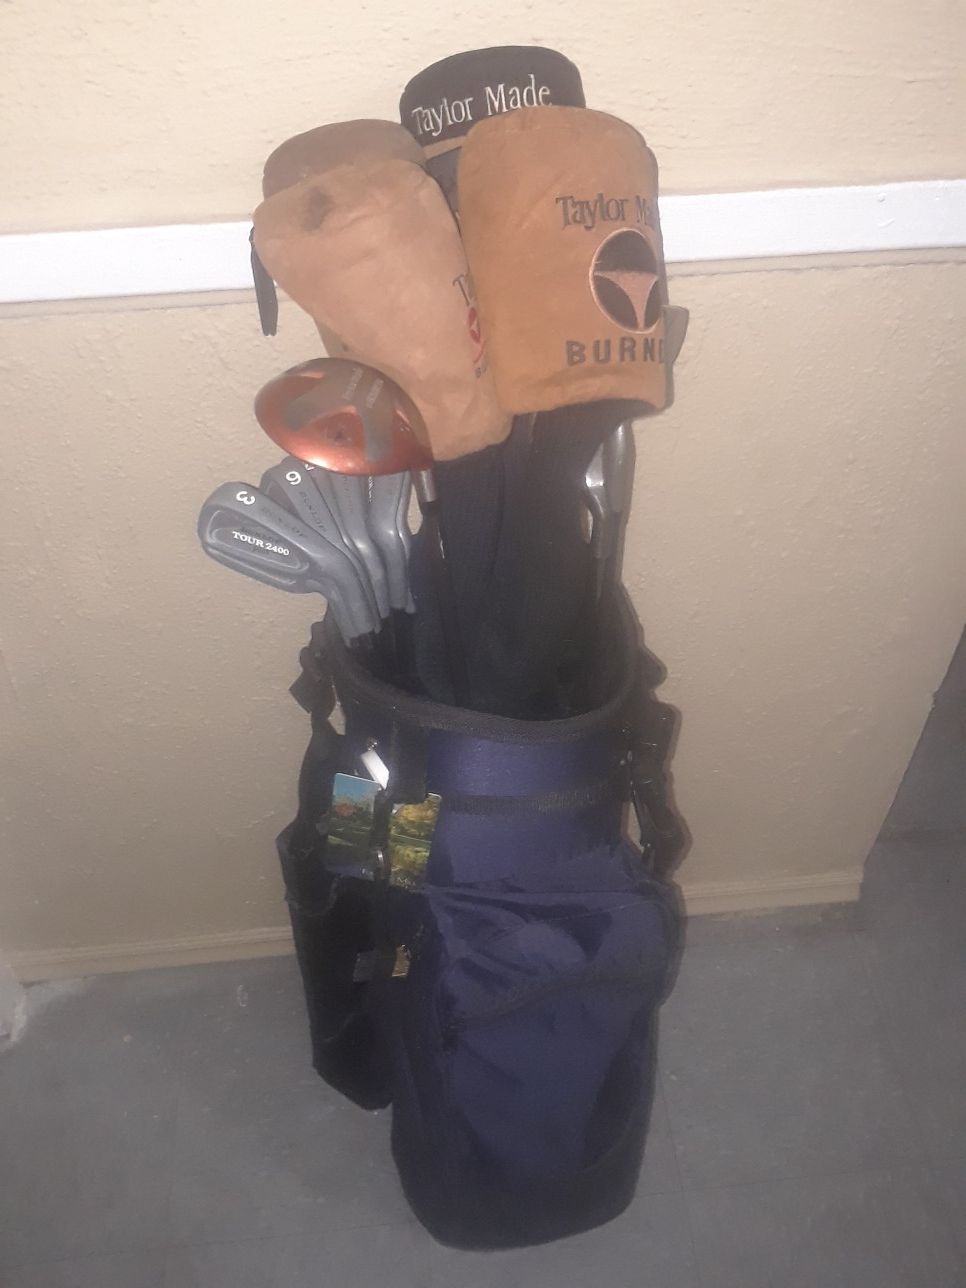 Arnold Palmer golf bag and clubs